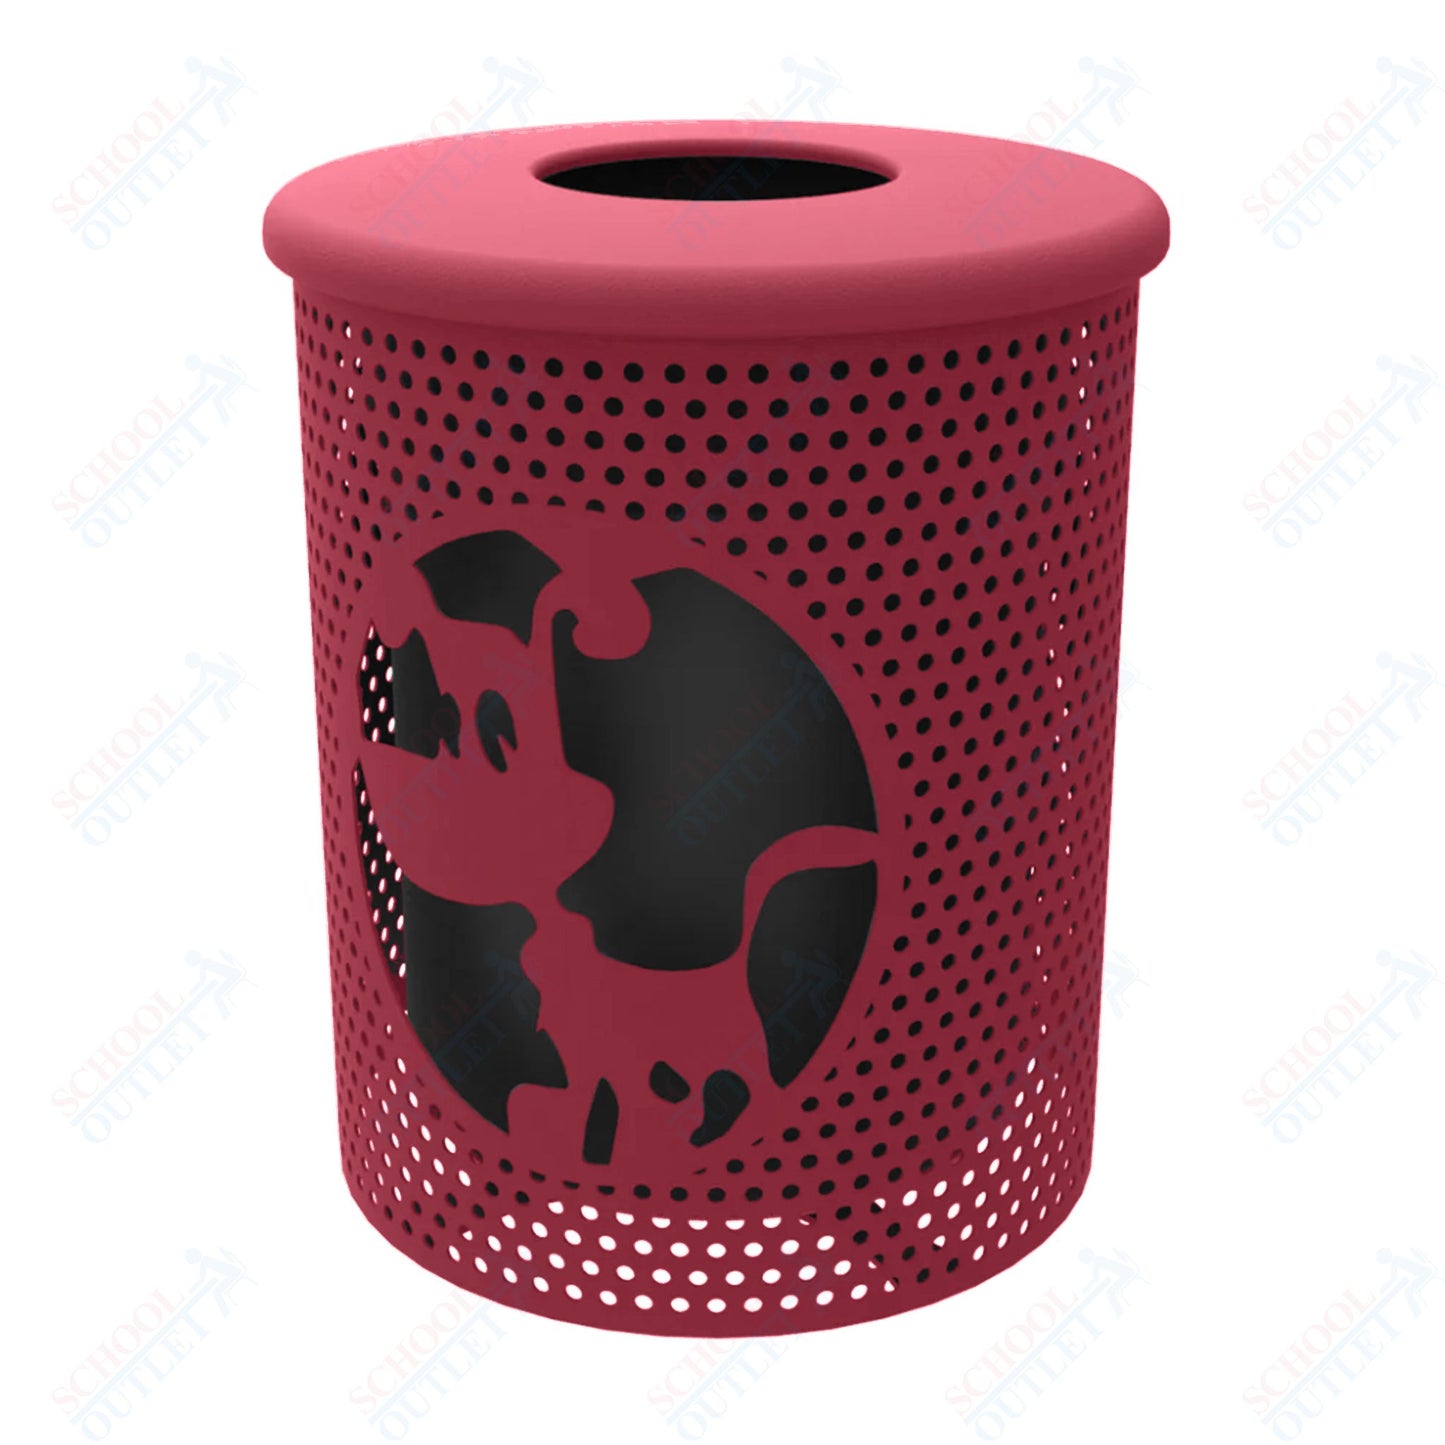 MyTcoat - Dog Themed Trash Receptacle with Flattop and Liner (MYT-DOG12)